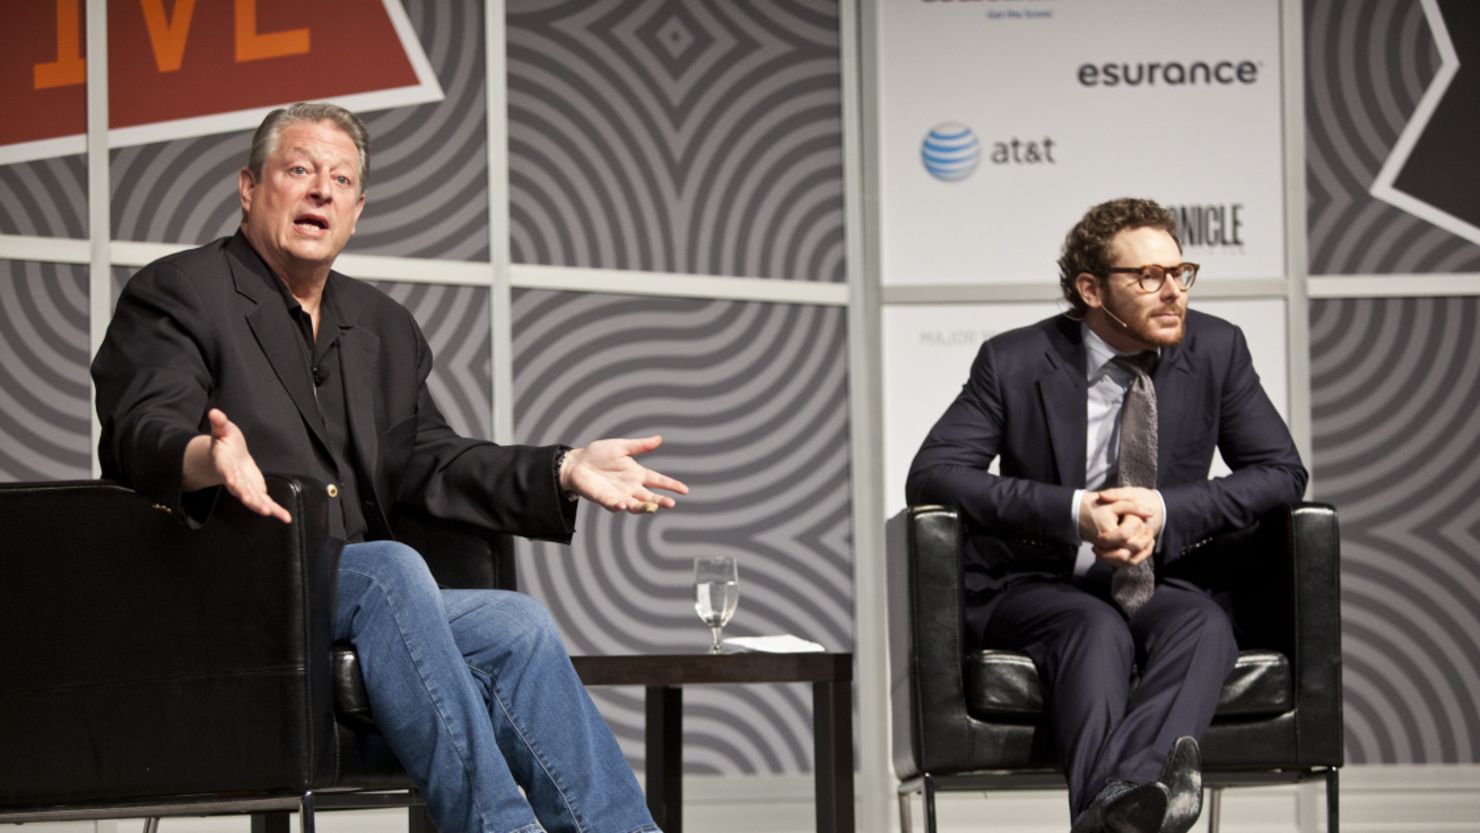 Former Vice President Al Gore and Napster co-founder Sean Parker speak during South by Southwest in Austin, Texas.